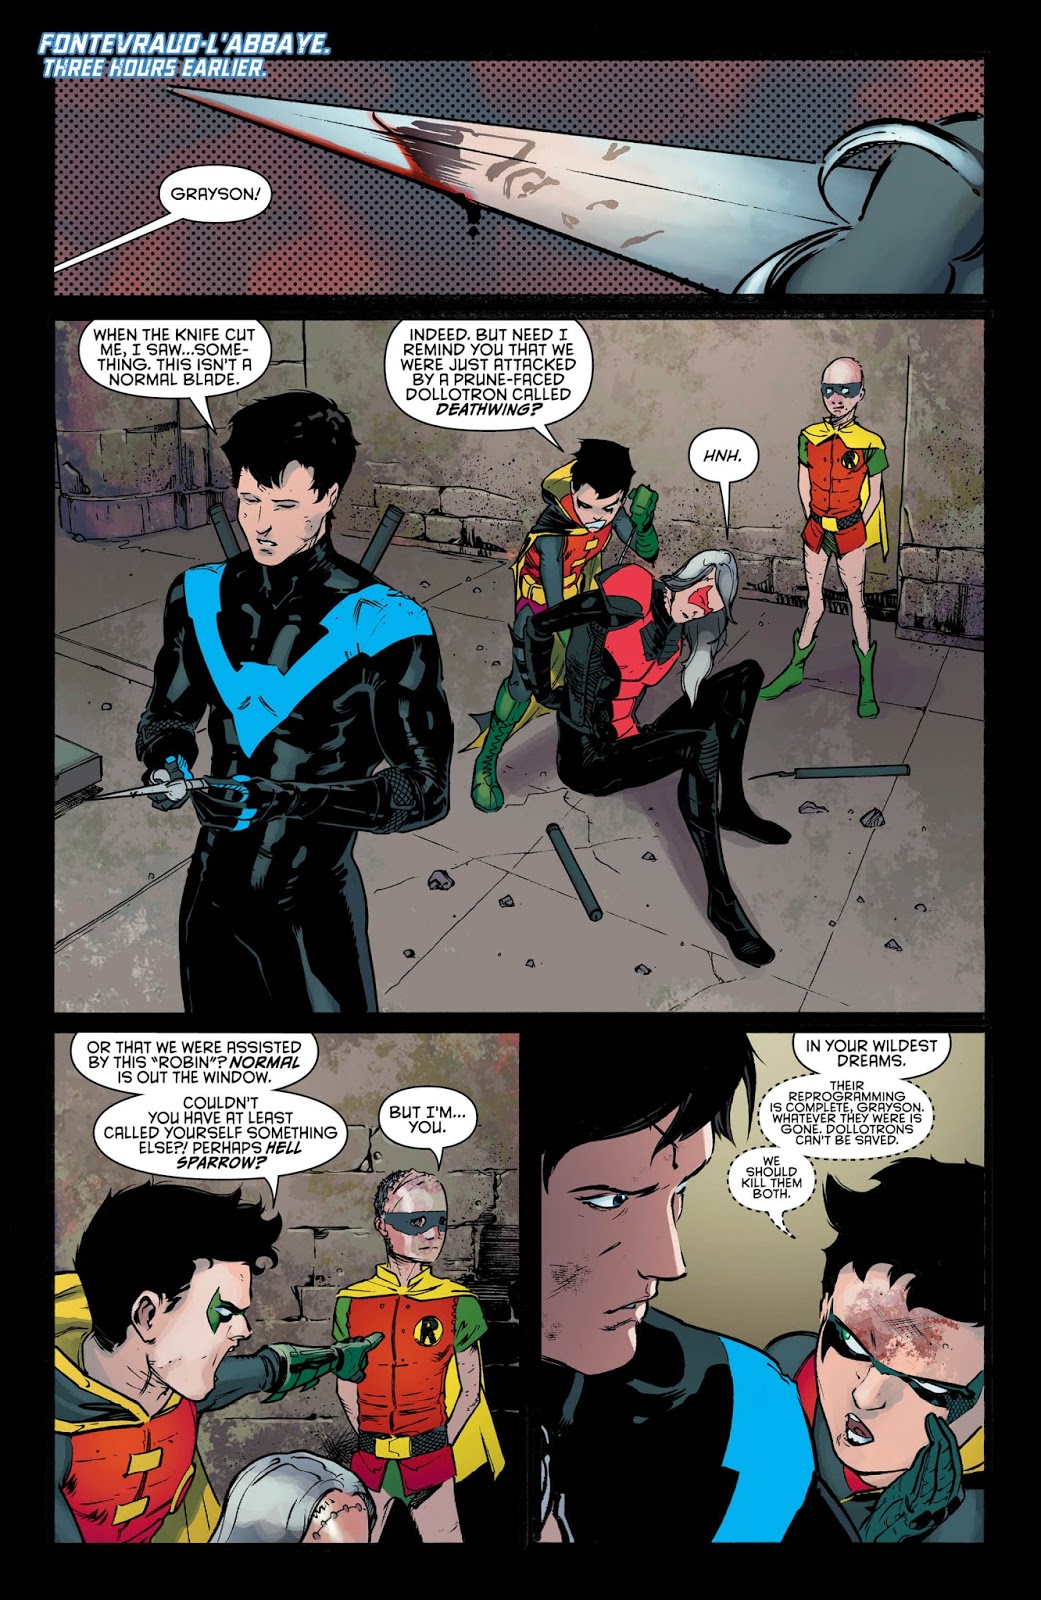 Weird Science DC Comics: Nightwing #18 Review and *SPOILERS*